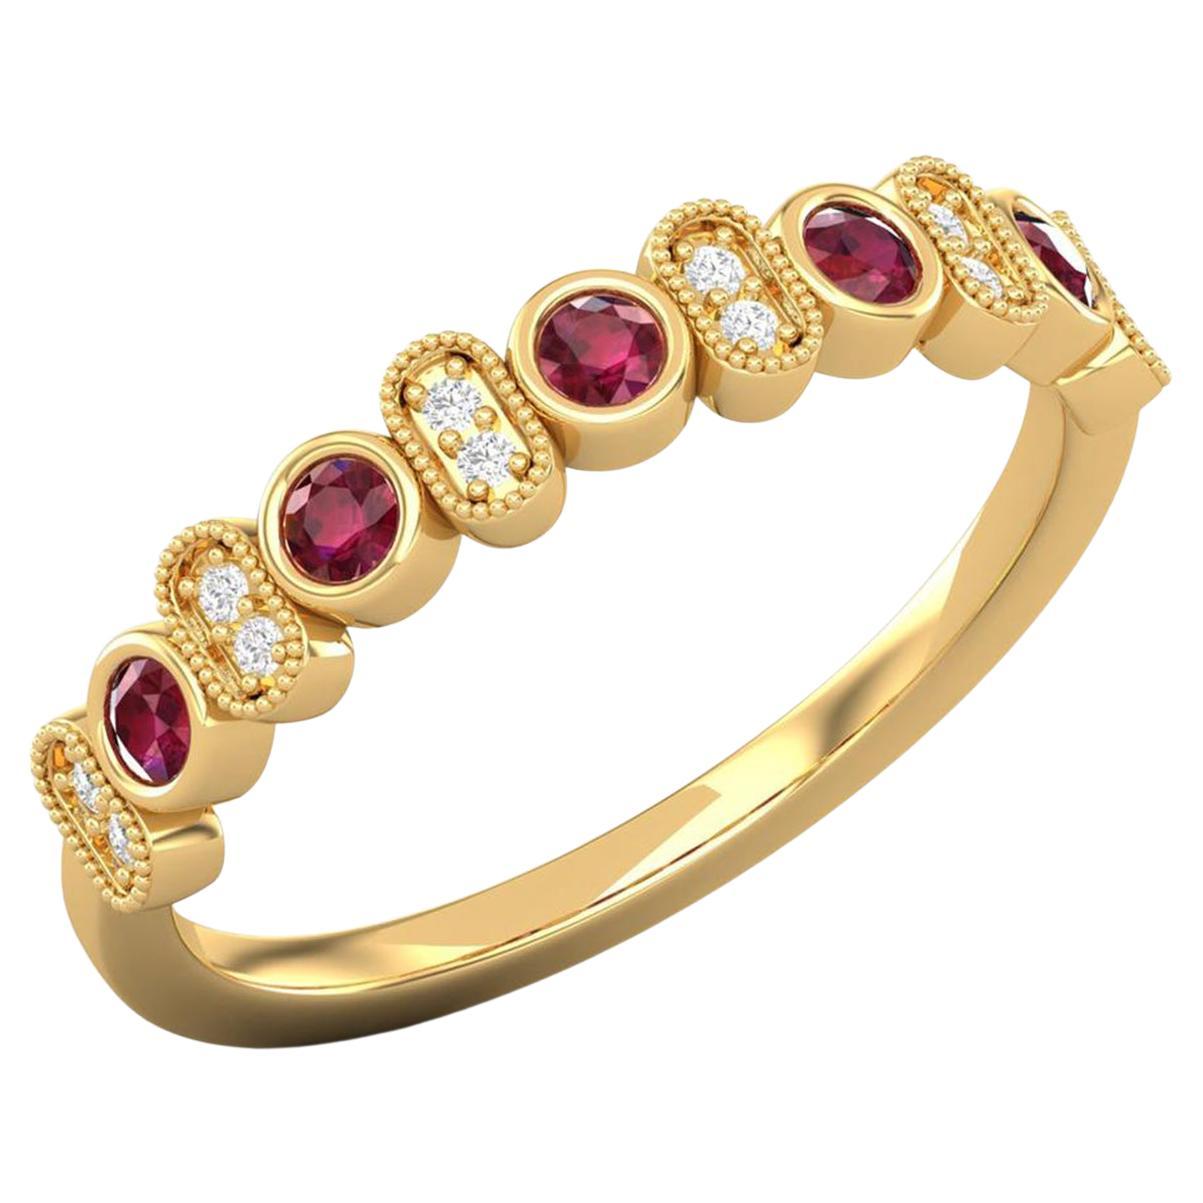 14 Karat Gold 0.1 MM Diamond Ring / 2 MM Ruby Ring / Ring for Her / Cluster Band